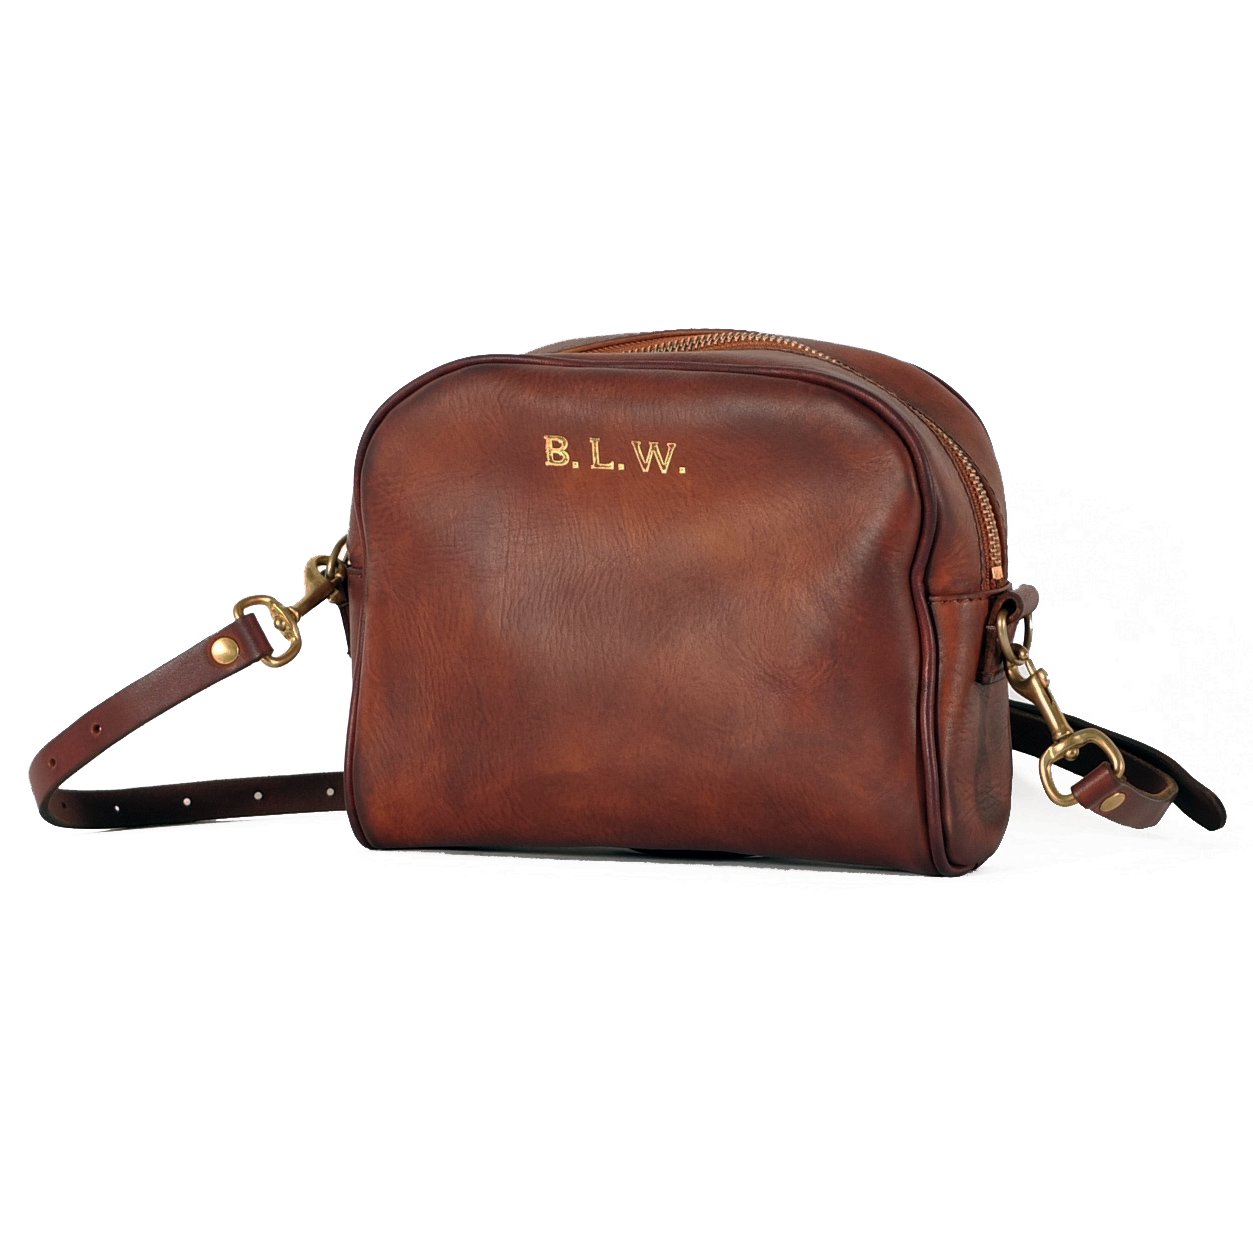 LEATHER OFFICER POUCH BAG【B.L.W.】 - ANCHOR MILLS STORE